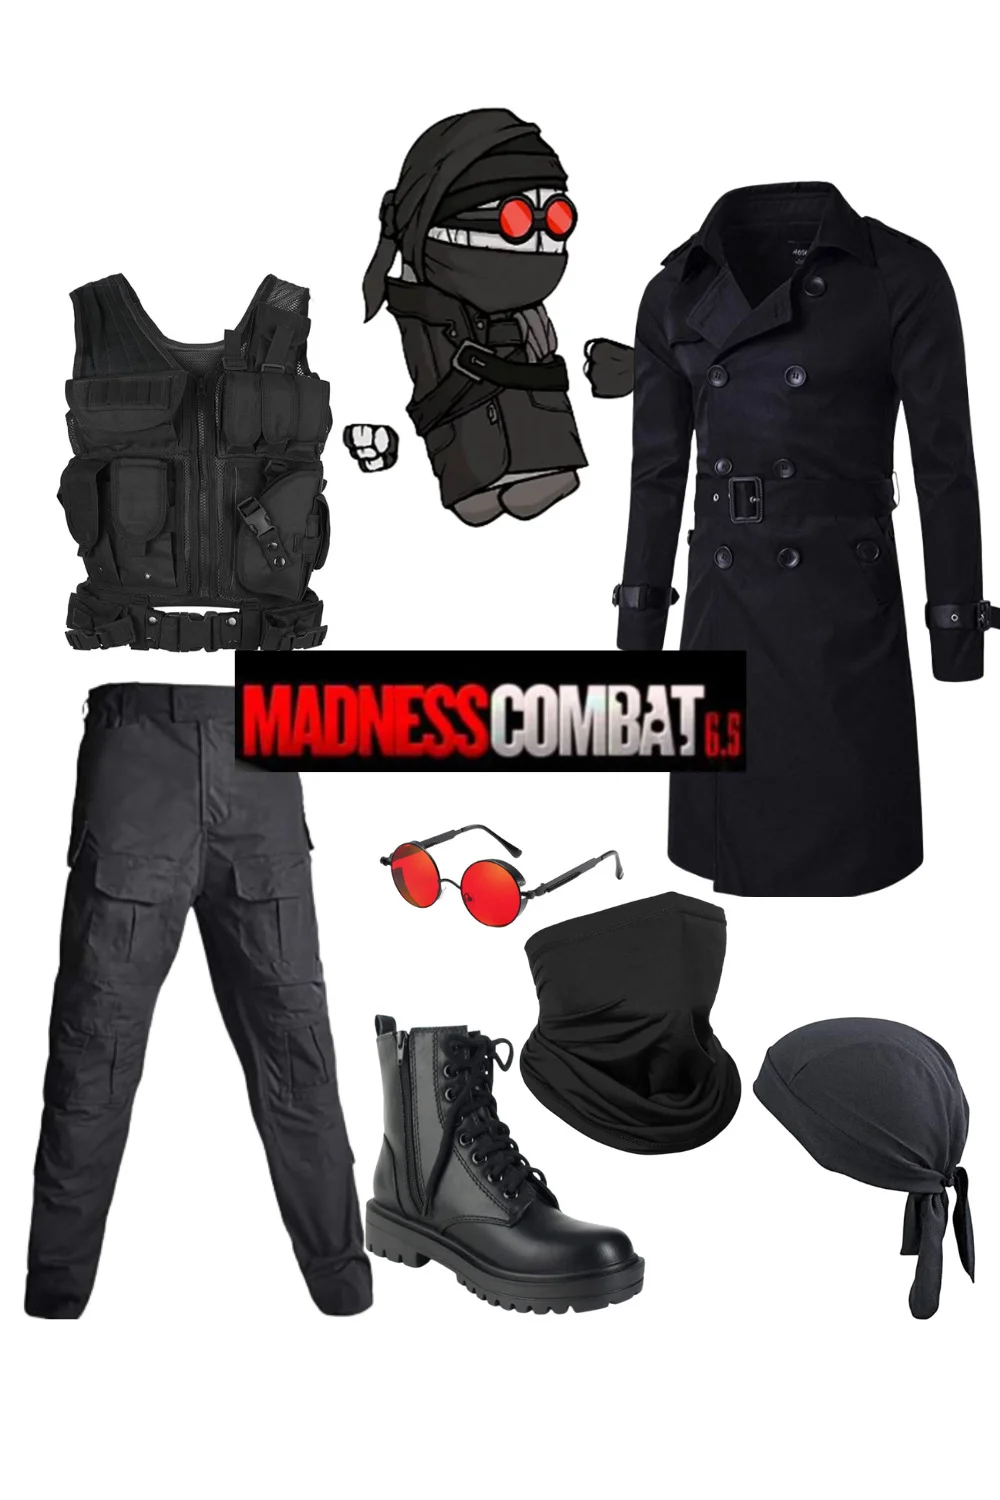 Make Your Own Hank J. Wimbleton from Madness Combat Costume